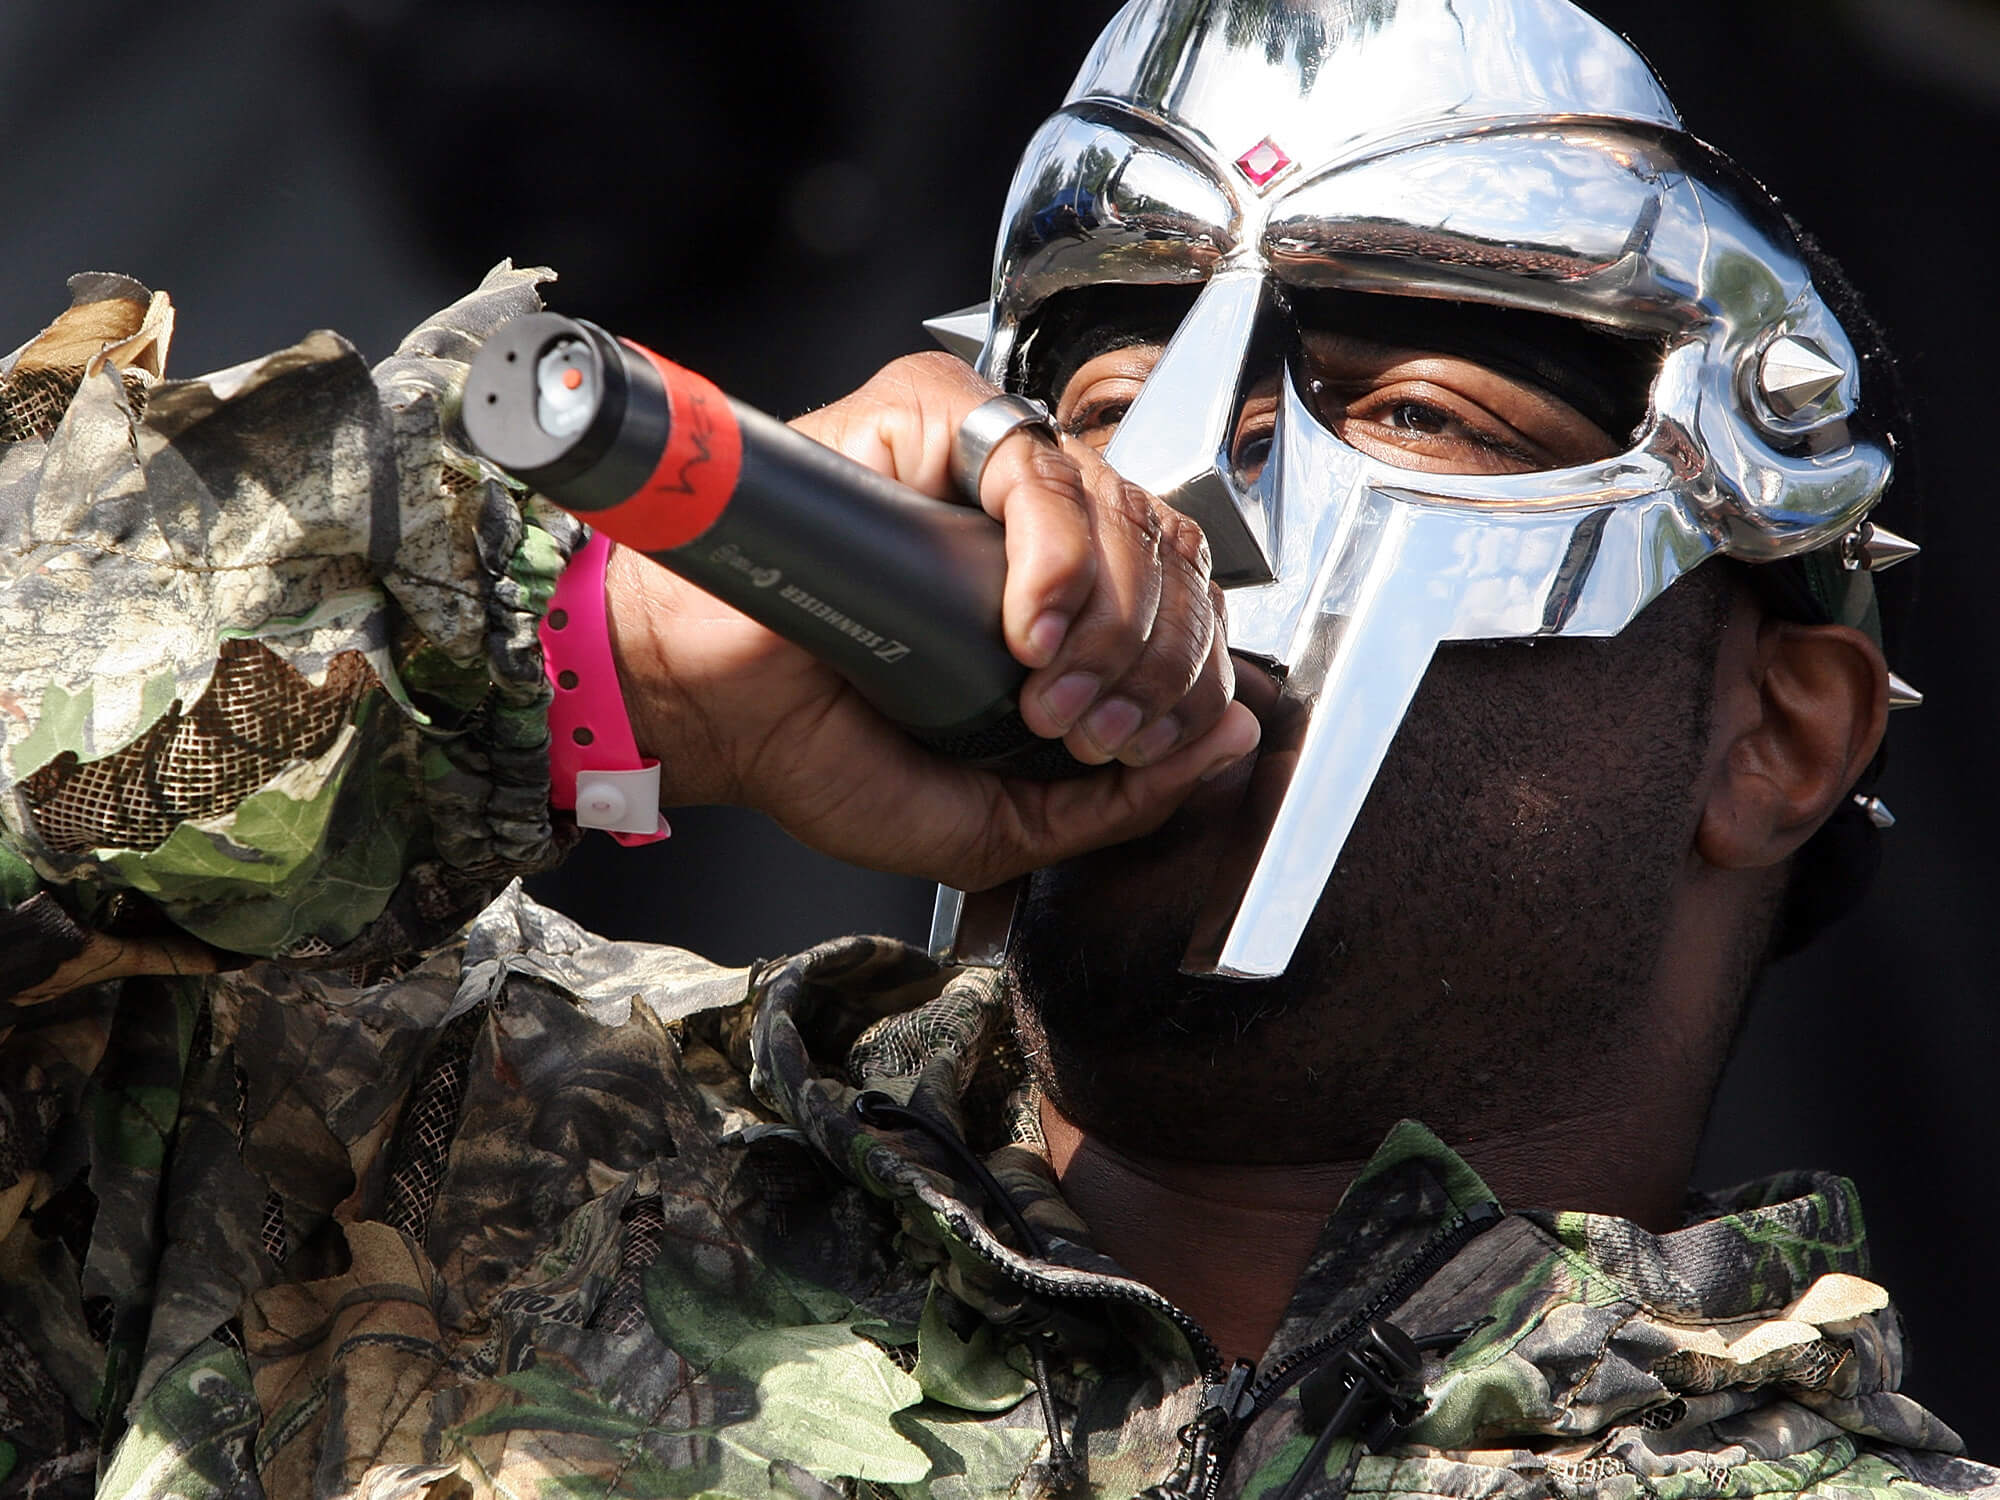 MF DOOM on stage in 2009